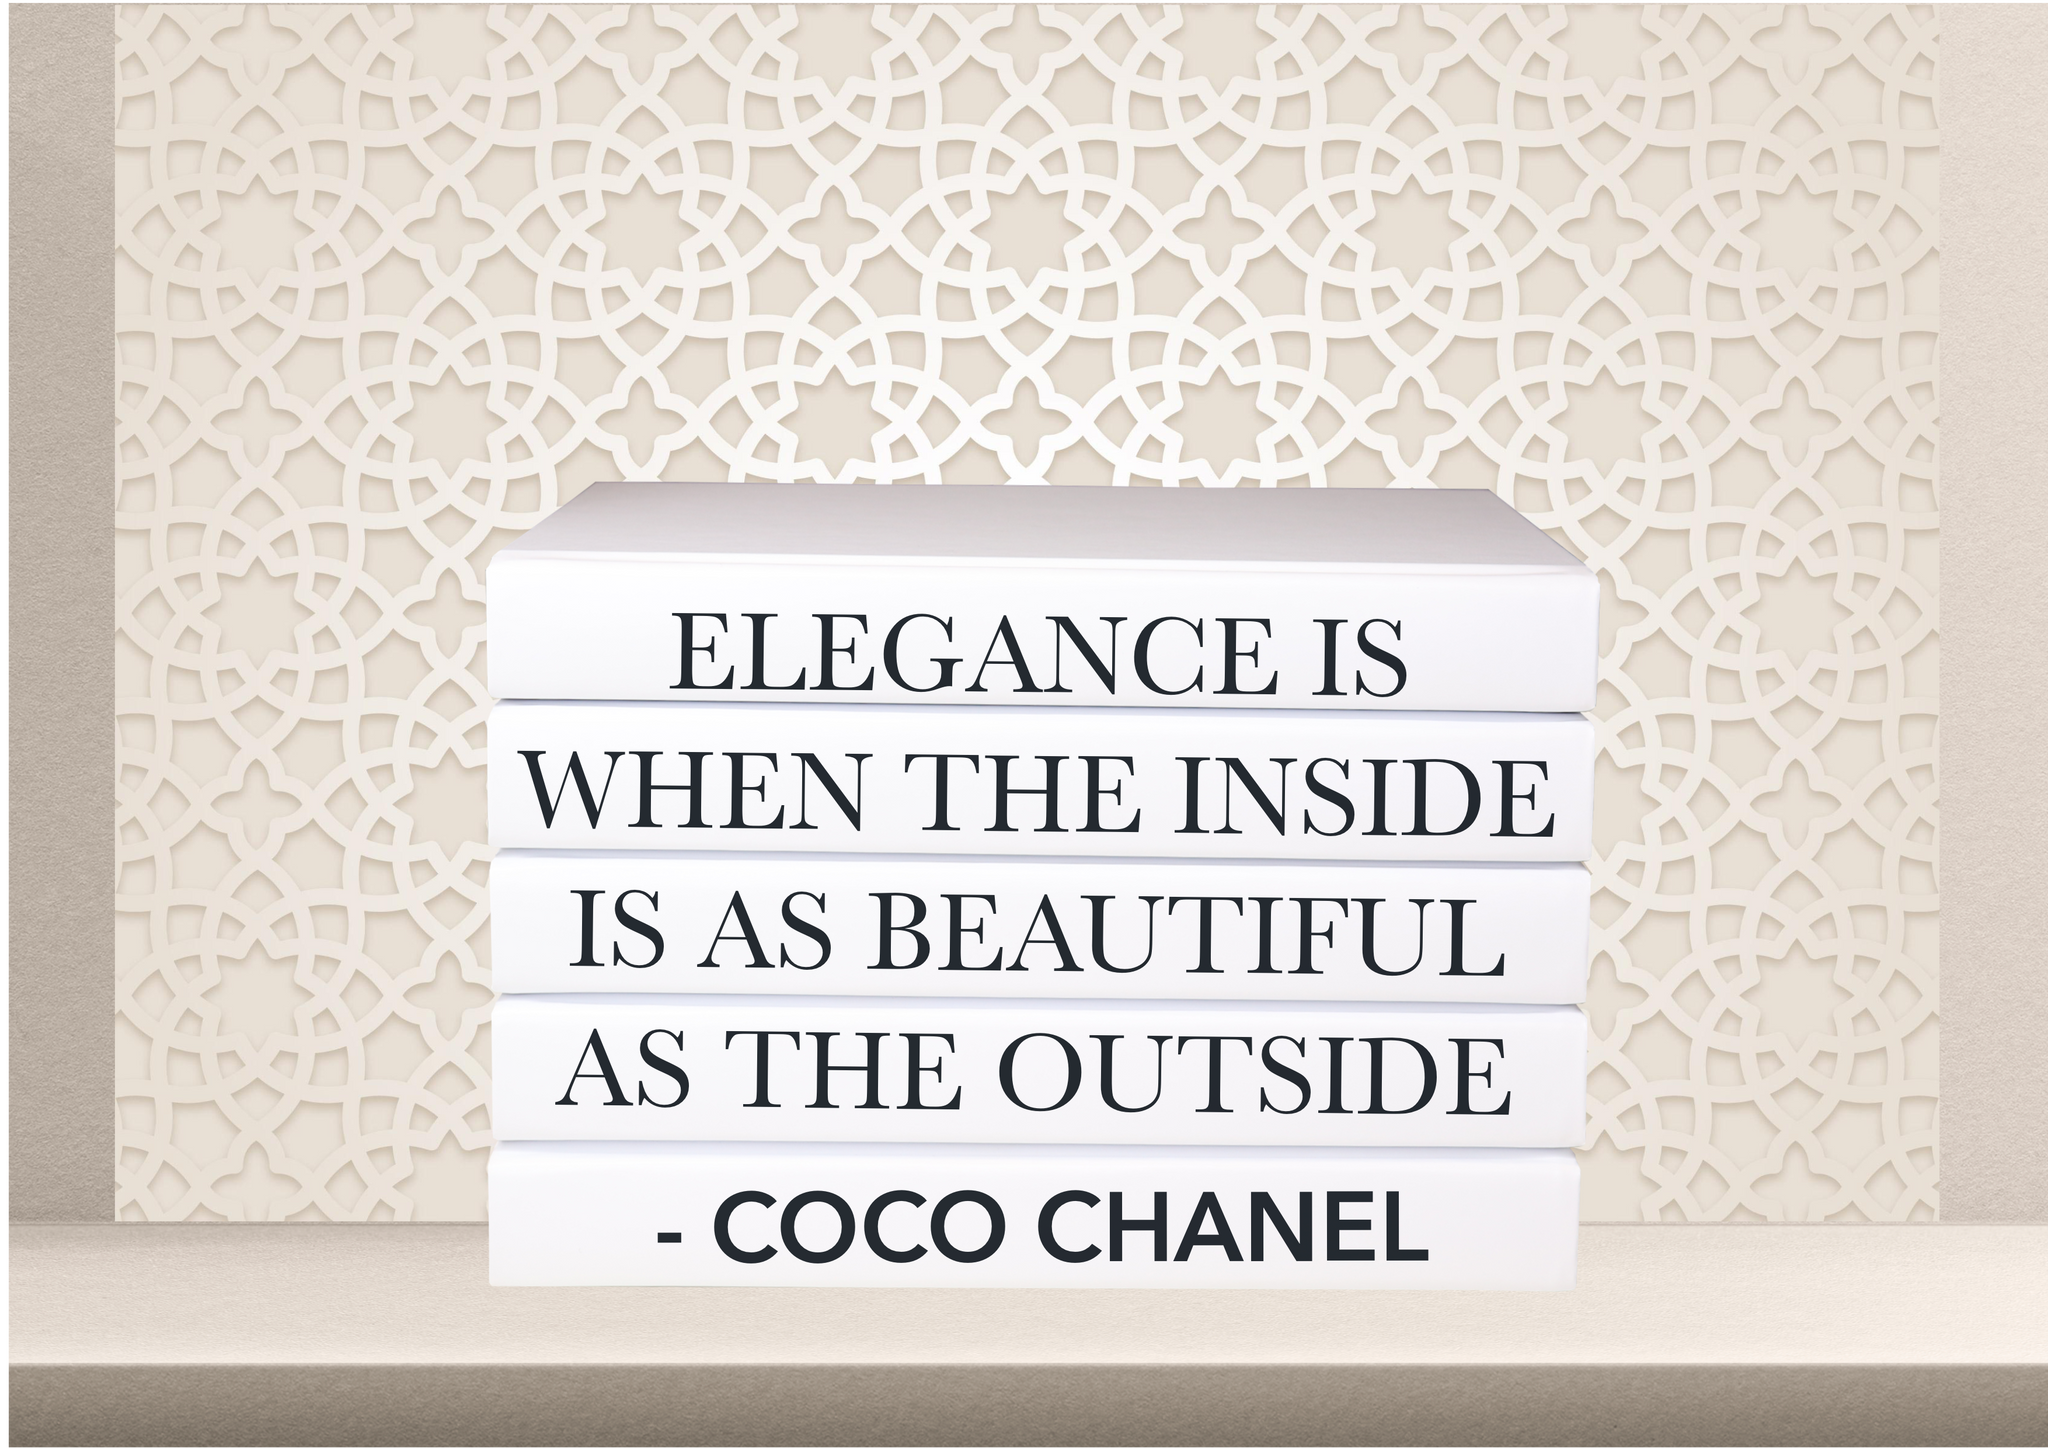 Elegance is when the inside is as beautiful as the outside - Coco